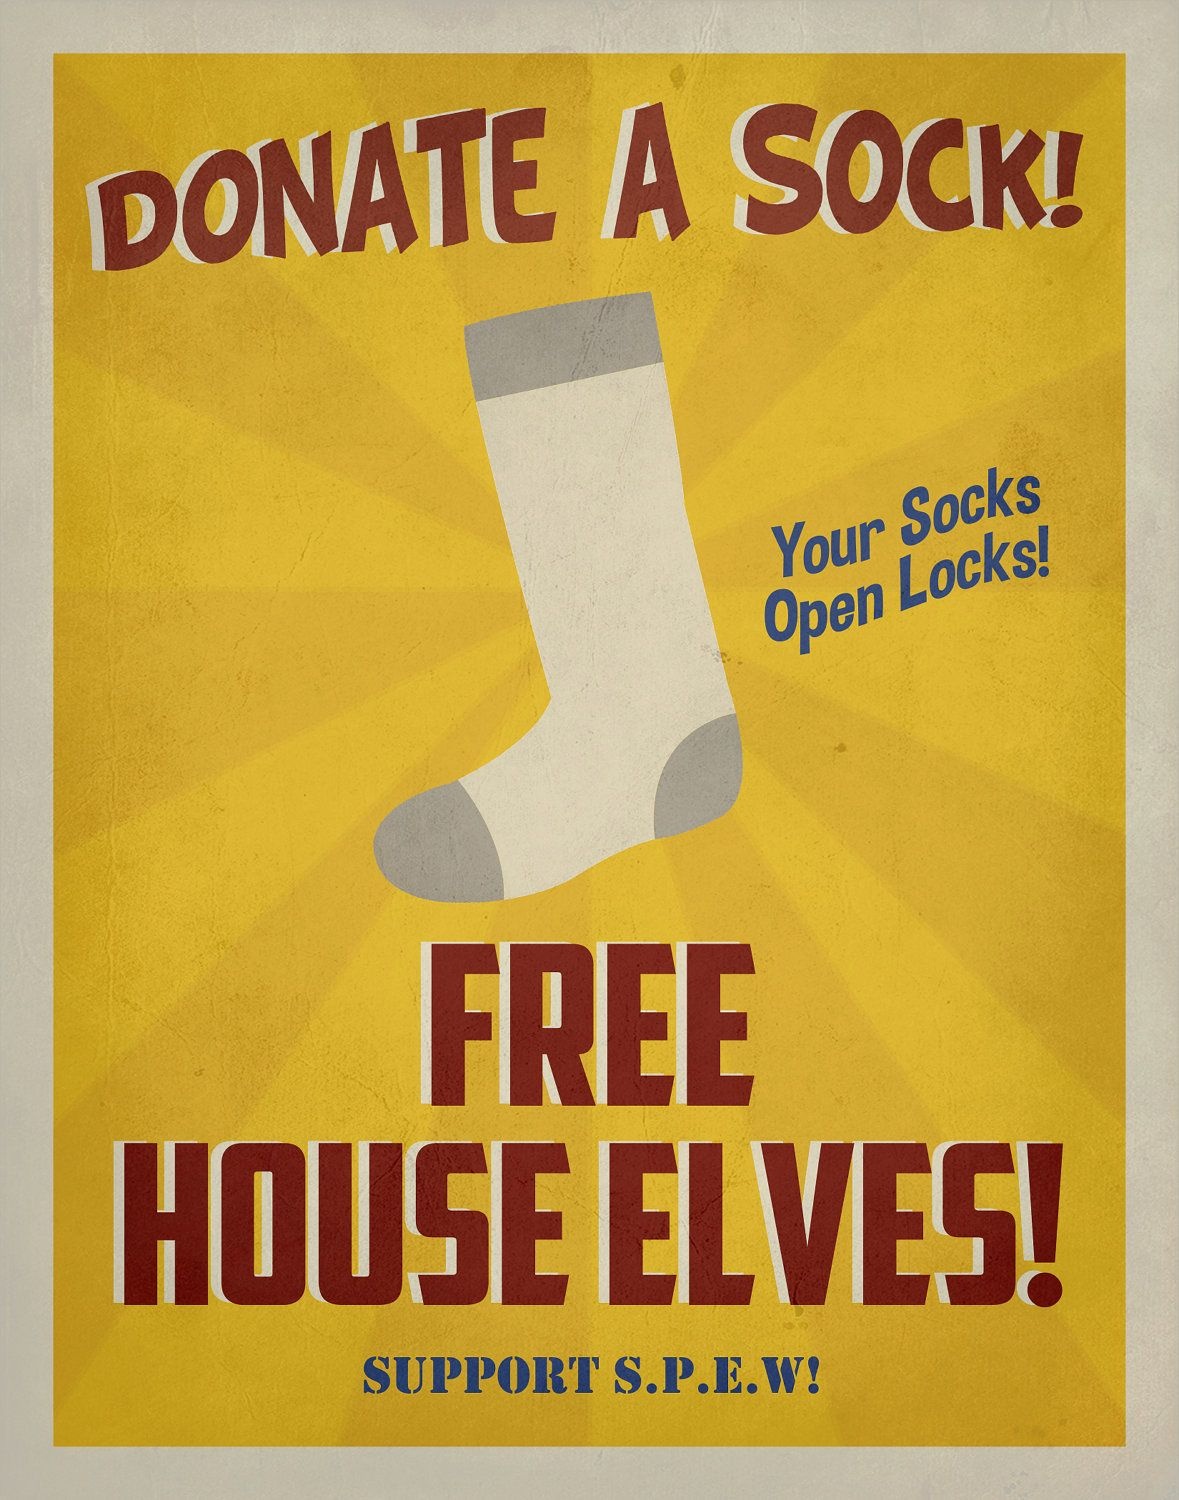 Harry Potter Poster / Spew Poster / Spew Free House Elves Propaganda - Free Printable Harry Potter Posters